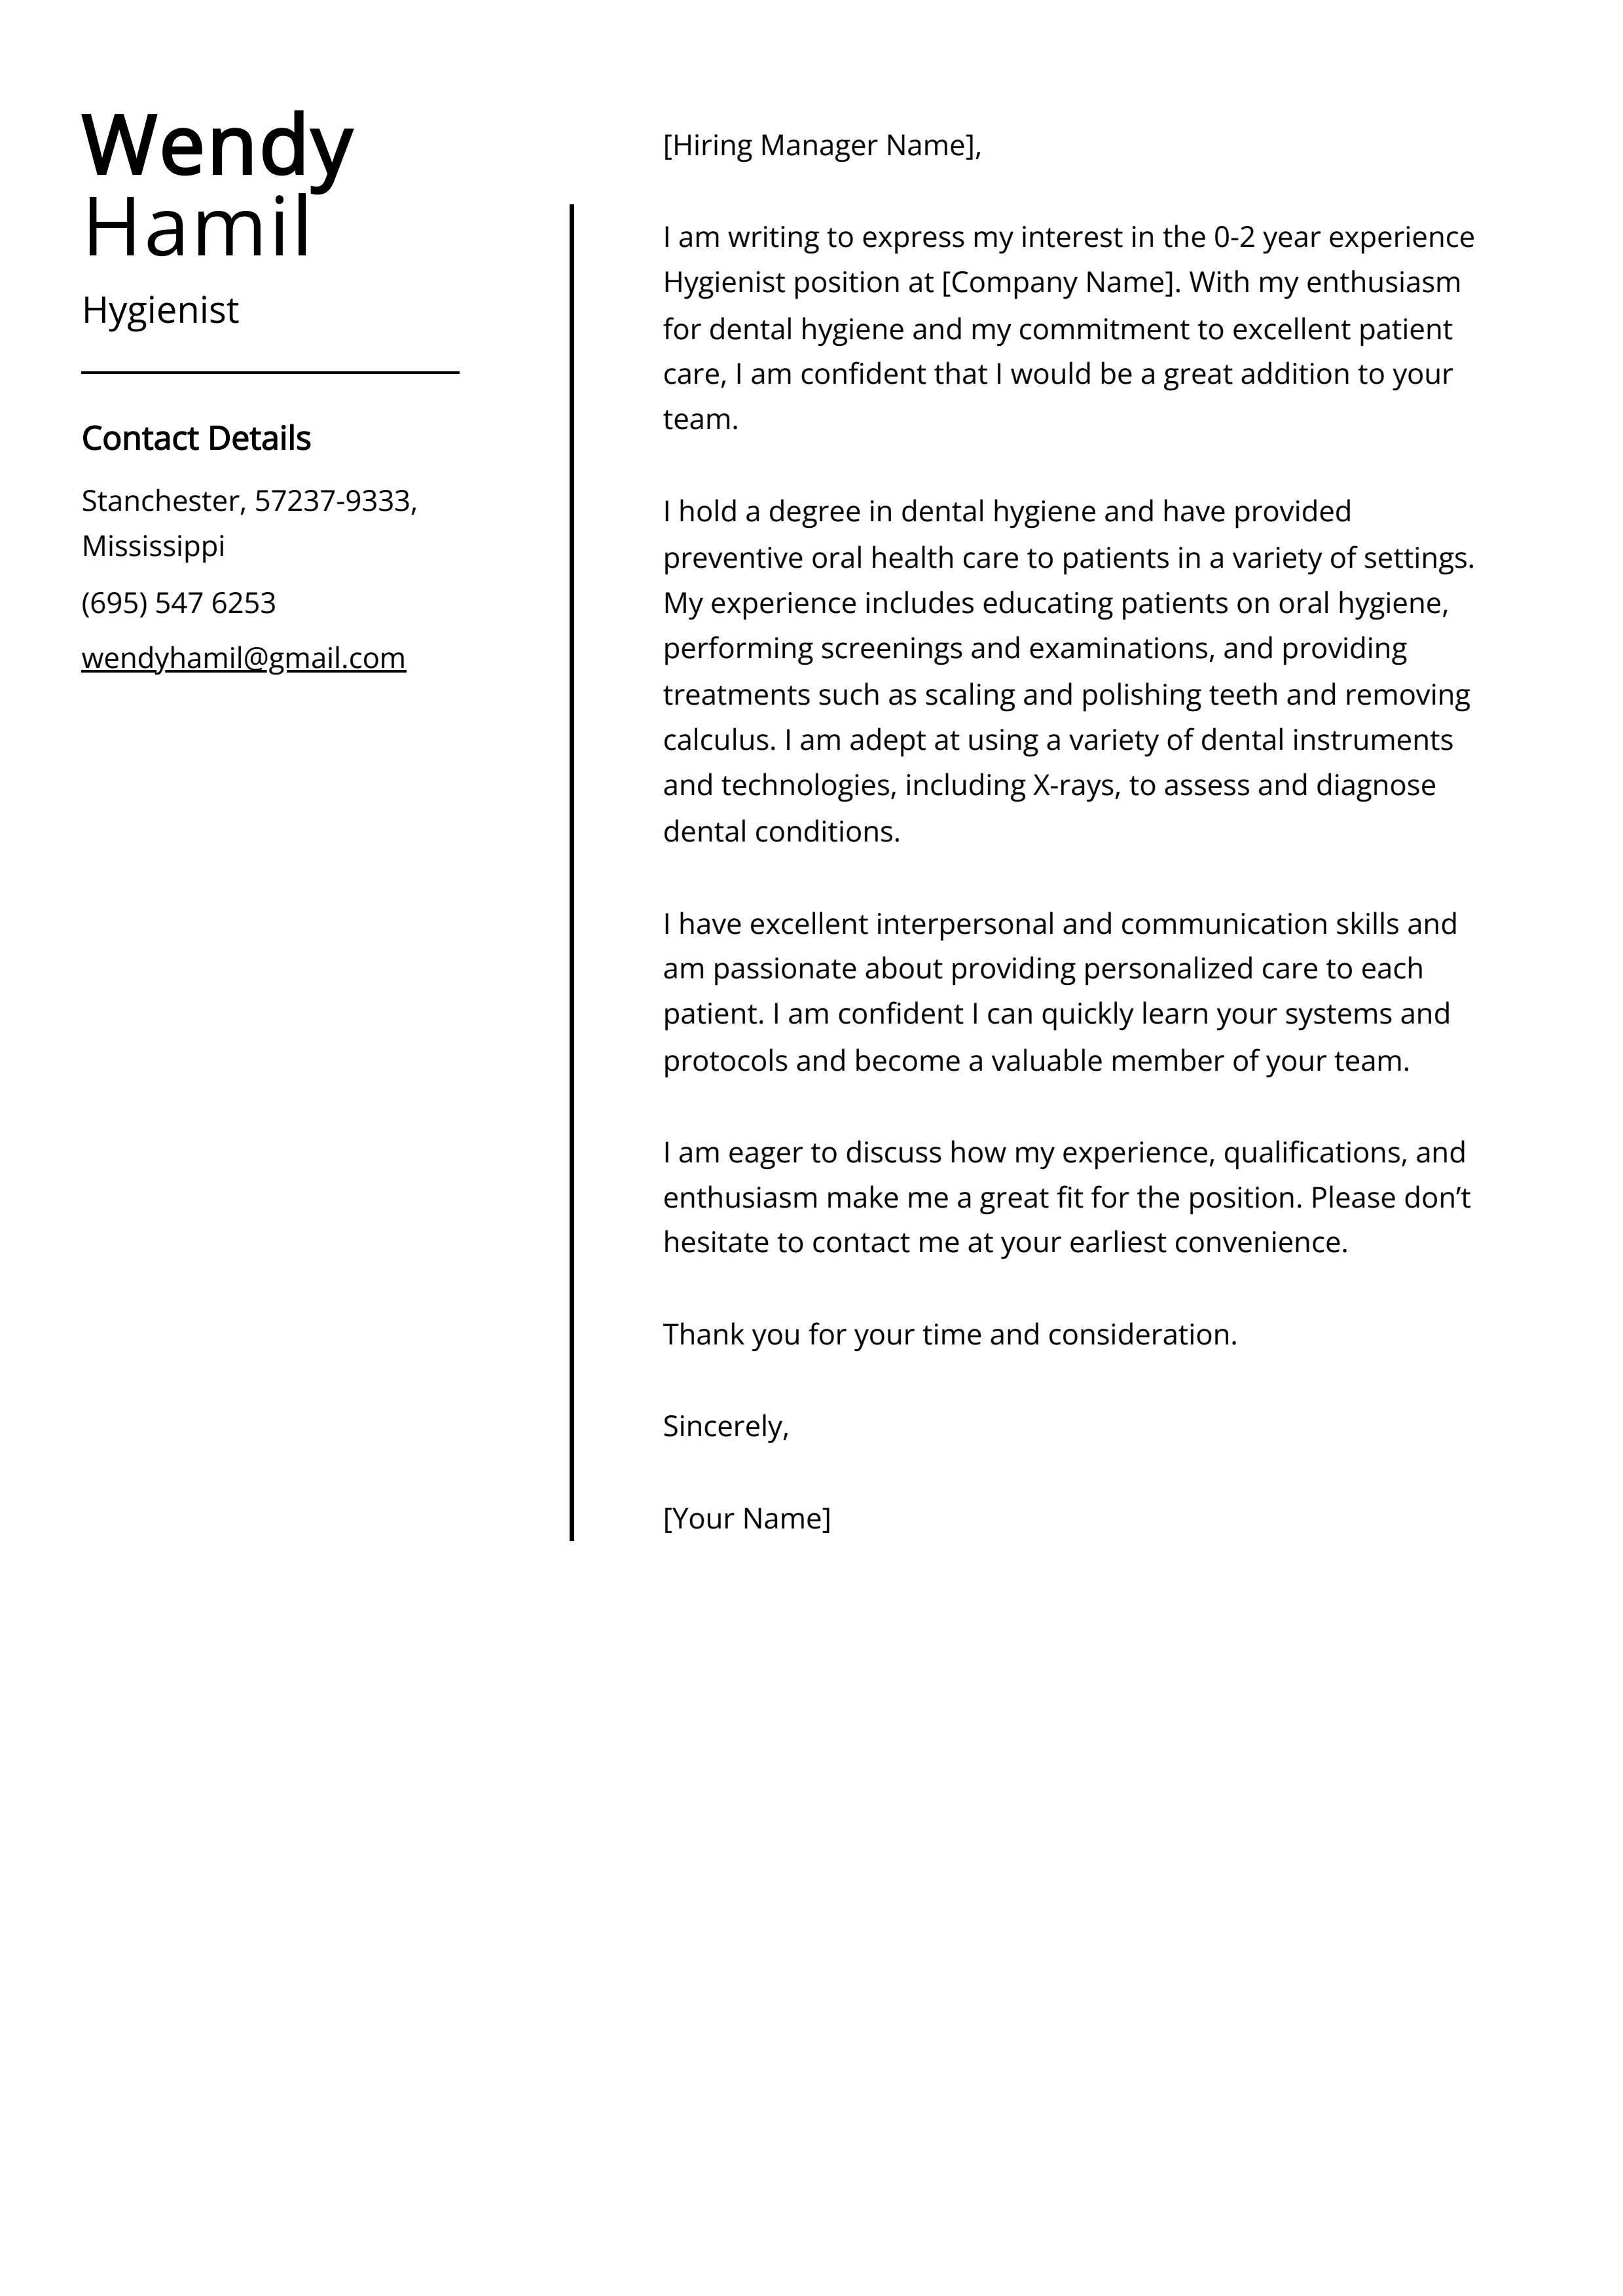 Hygienist Cover Letter Example